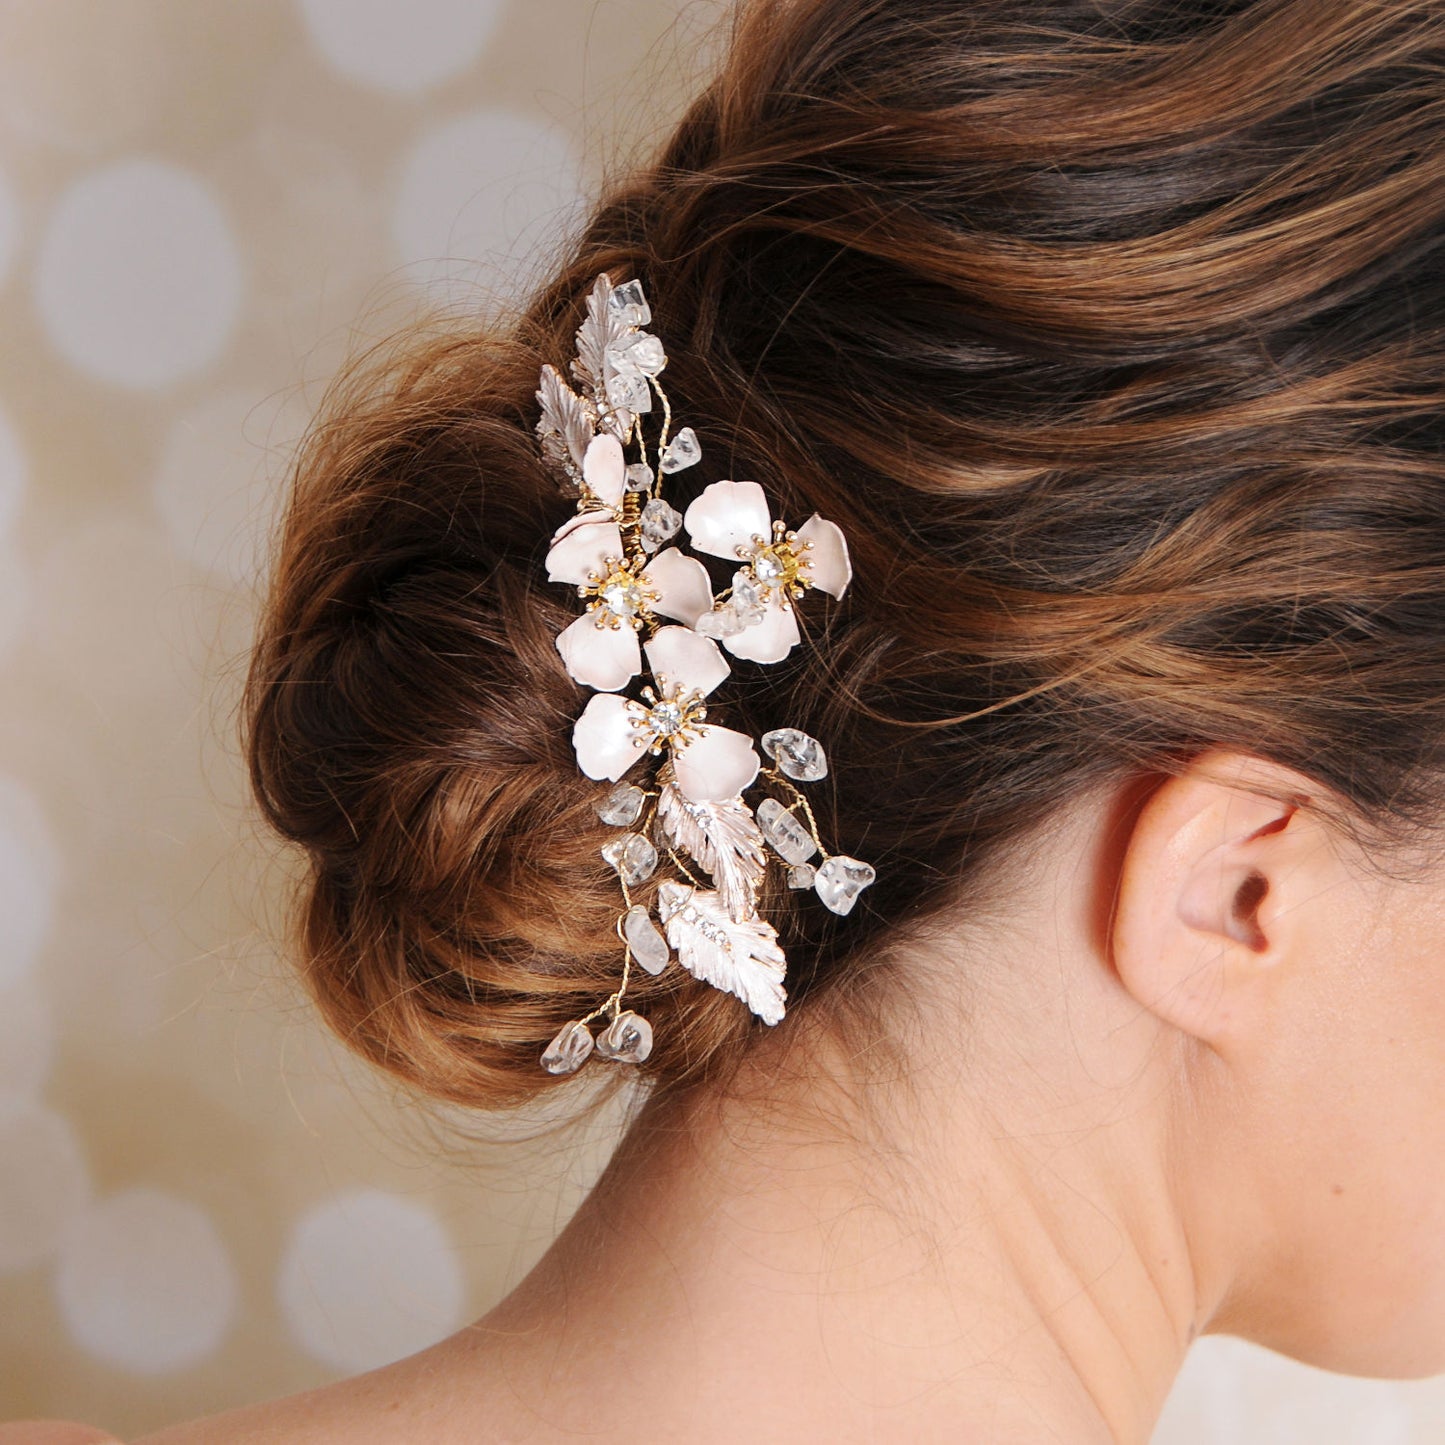 https://bridal-accessories.co.uk/product/wildflower-hair-comb/